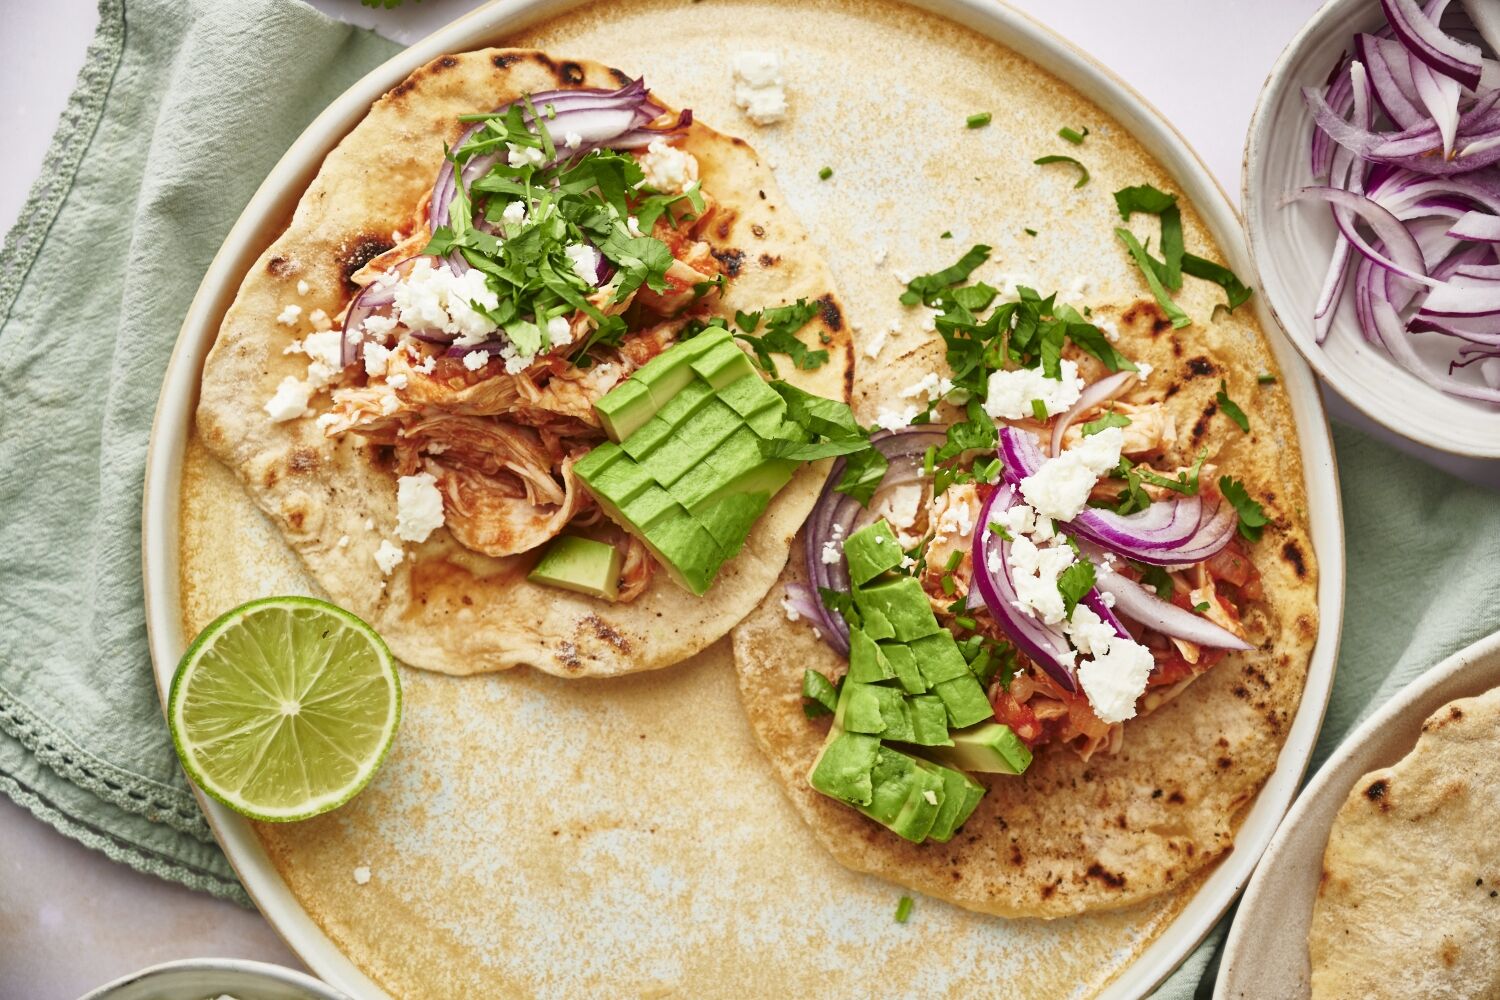 Chicken tinga tacos served on corn tortillas with queso fresco, cilantro, lime, and red onion.